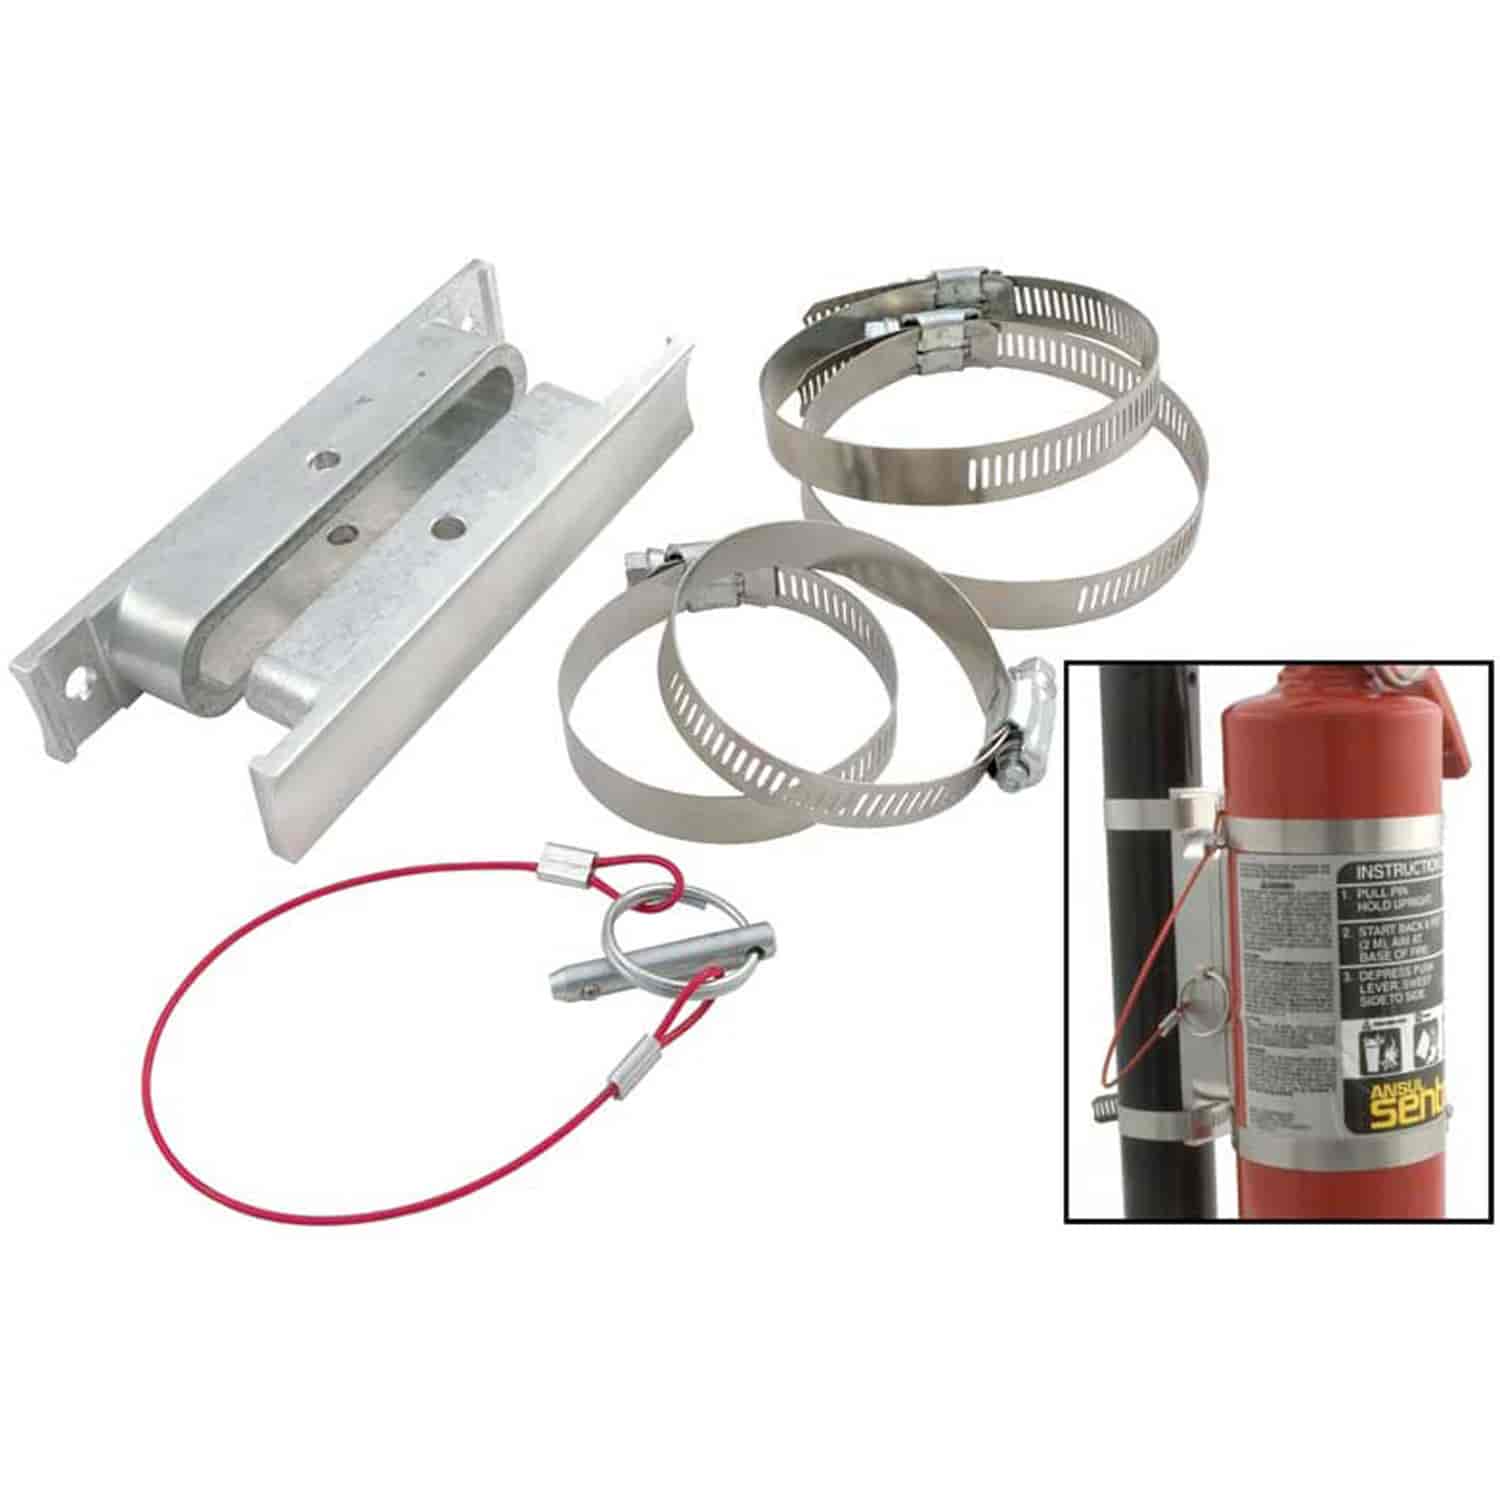 Quick-Release Fire Extinguisher Mount For 2-1/2 lb Bottle Extinguishers